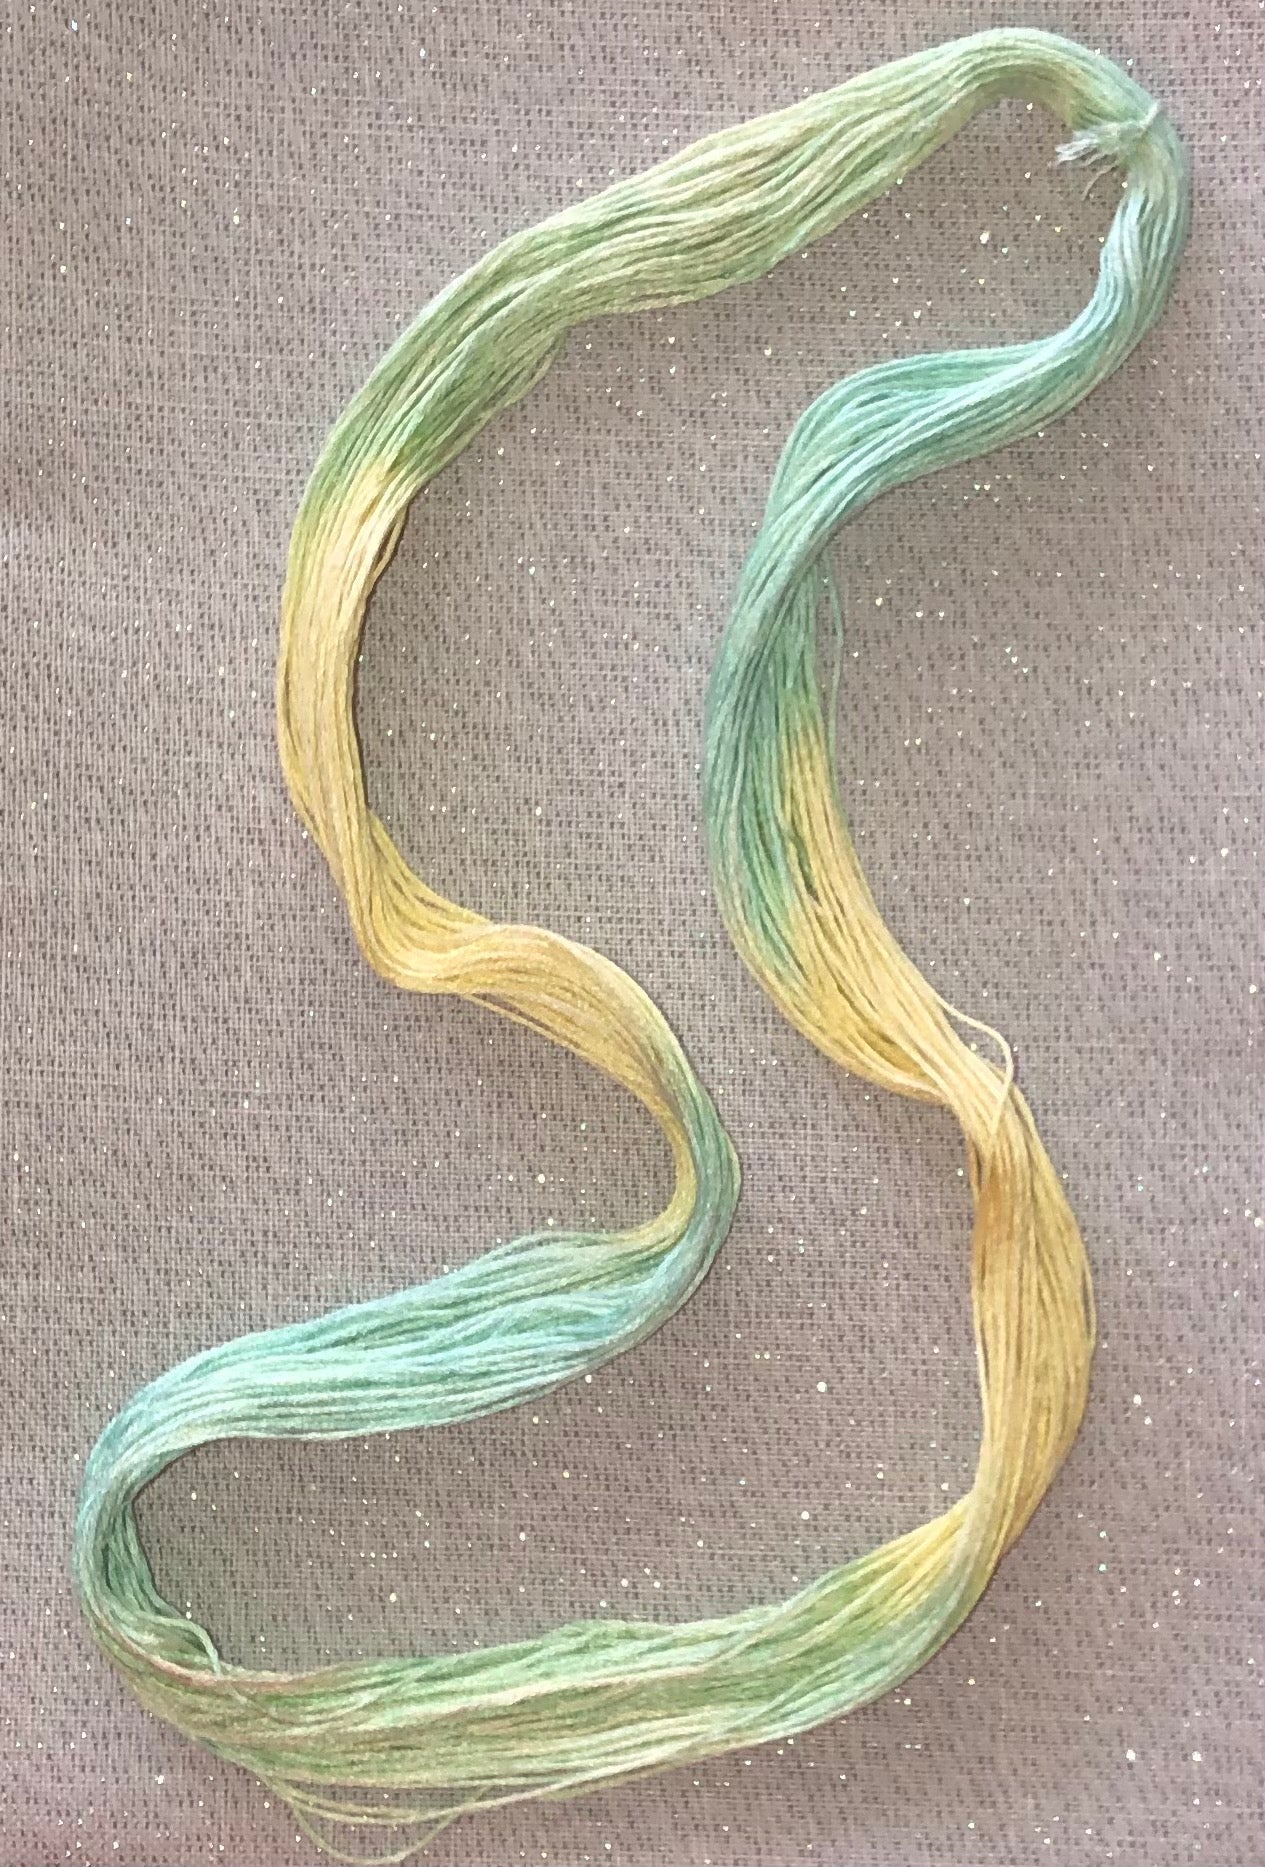 Silk hand dyed floss - Hoppy Easter - Dyeing for Cross Stitch